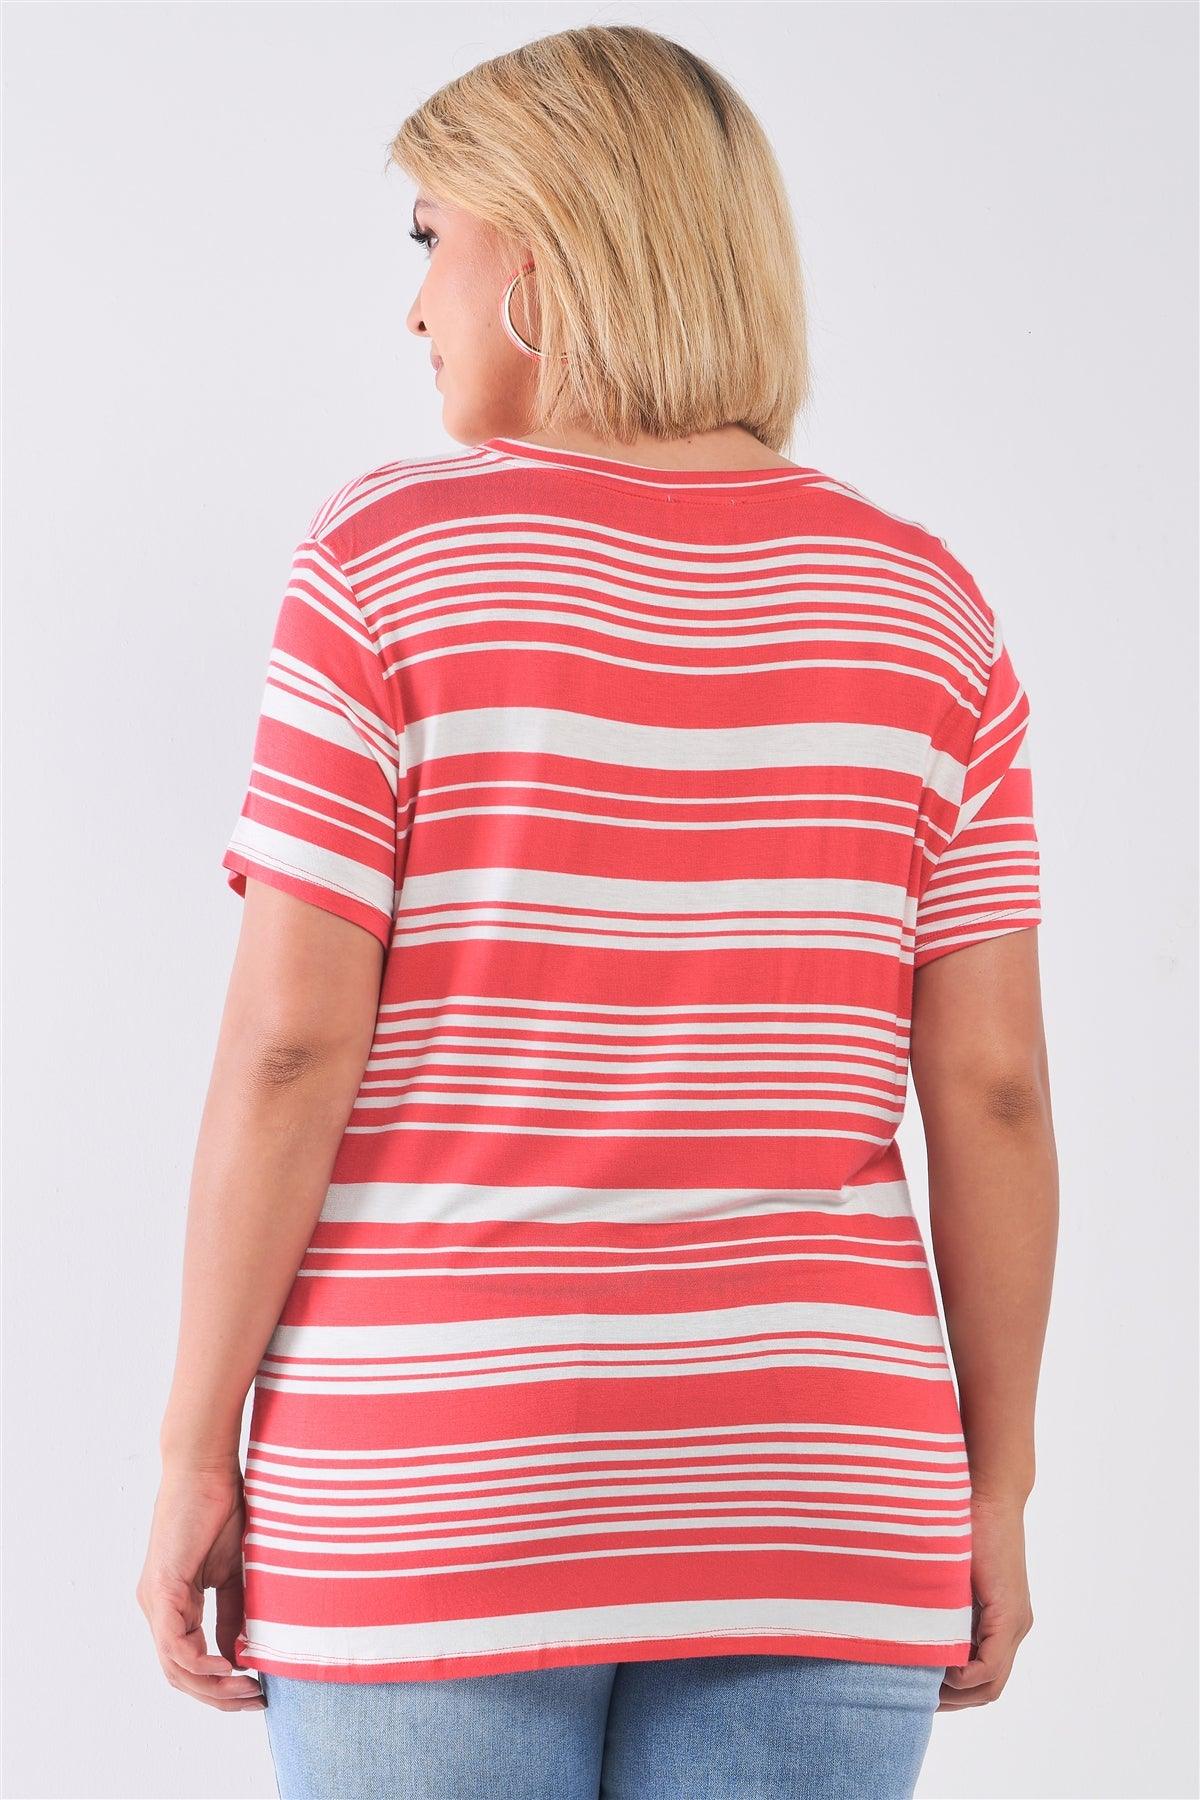 Junior Plus Coral Striped and Distressed Cut-Out Top /2-2-2